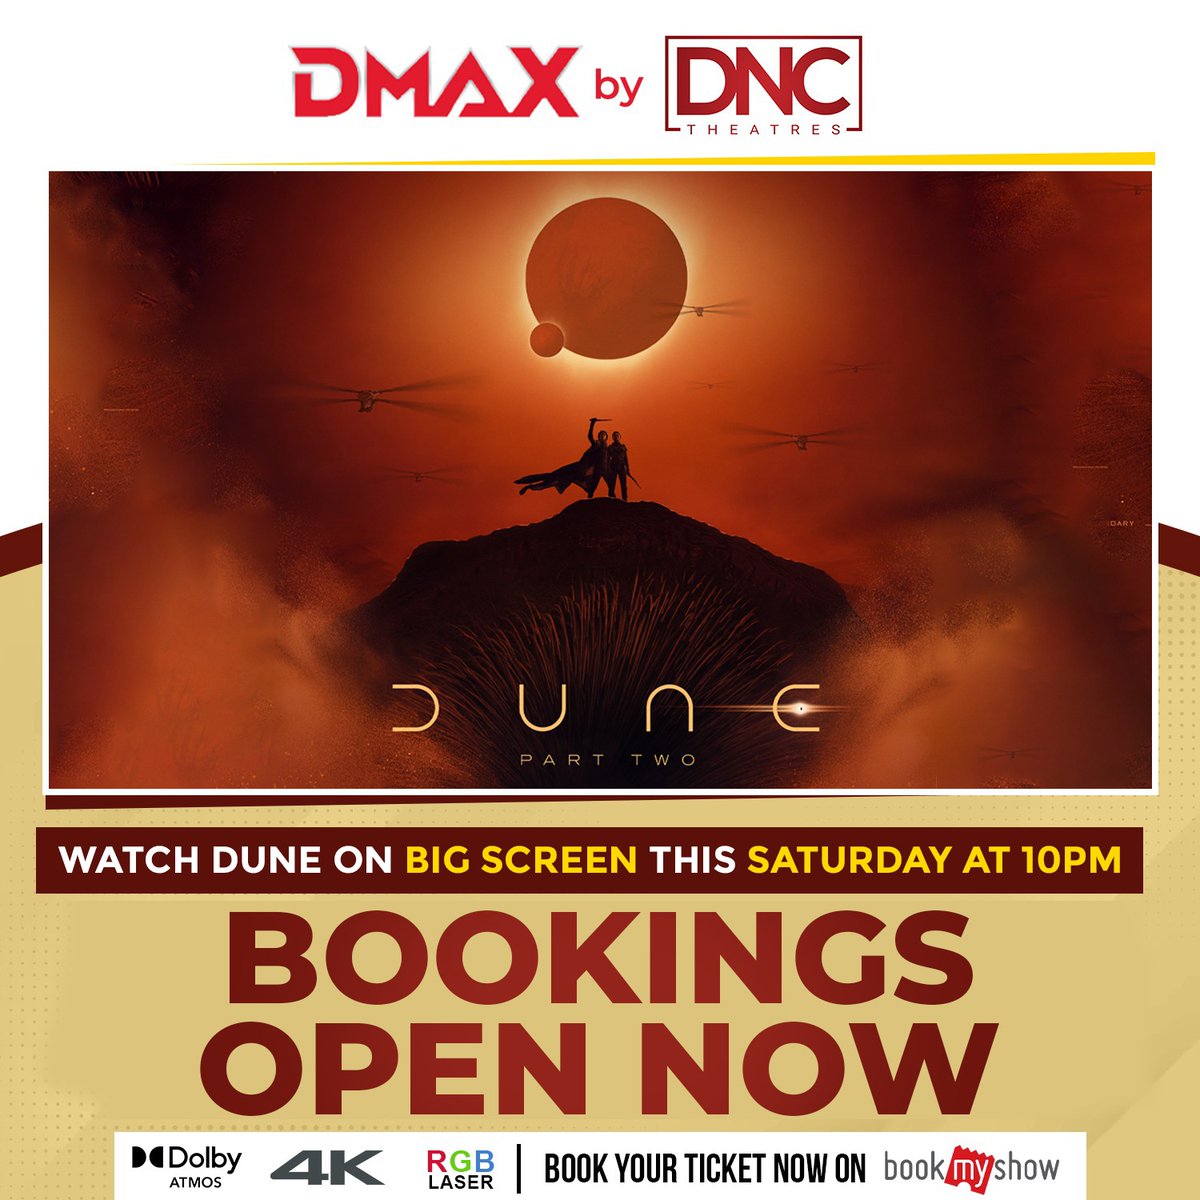 Unforgettable visuals and a gripping story! Watch #Dune Part 2 English On Big Screen Now Bookings Open Now At Your #DMAXbyDNCTheatres Book Your Tickets On #Bookmyshow